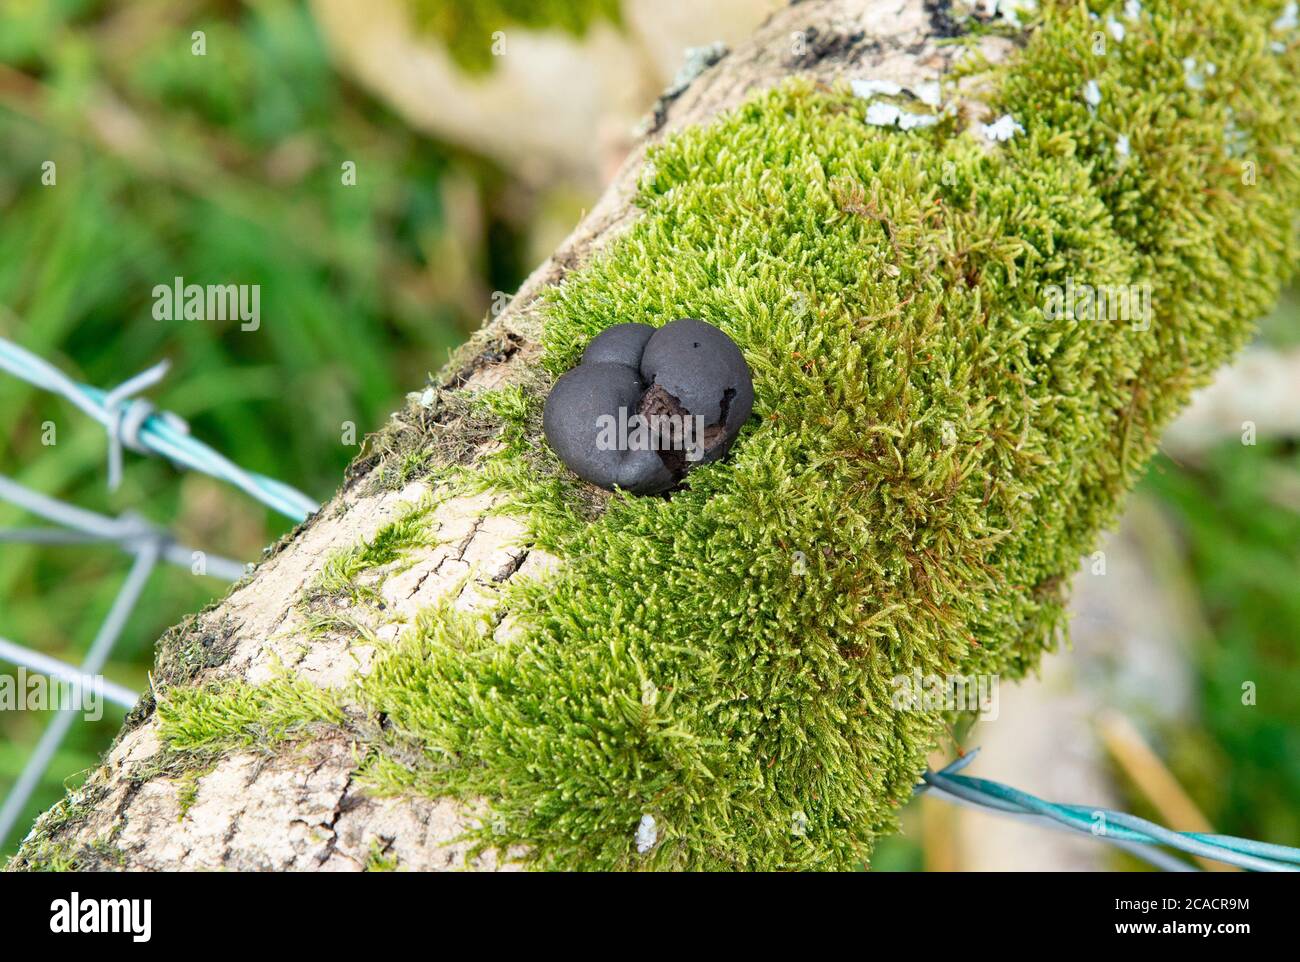 King Alfred's Cakes fungi on an Ash tree branch, Daldinia concentrica, Yealand Conyers, Lancashire, UK. Stock Photo